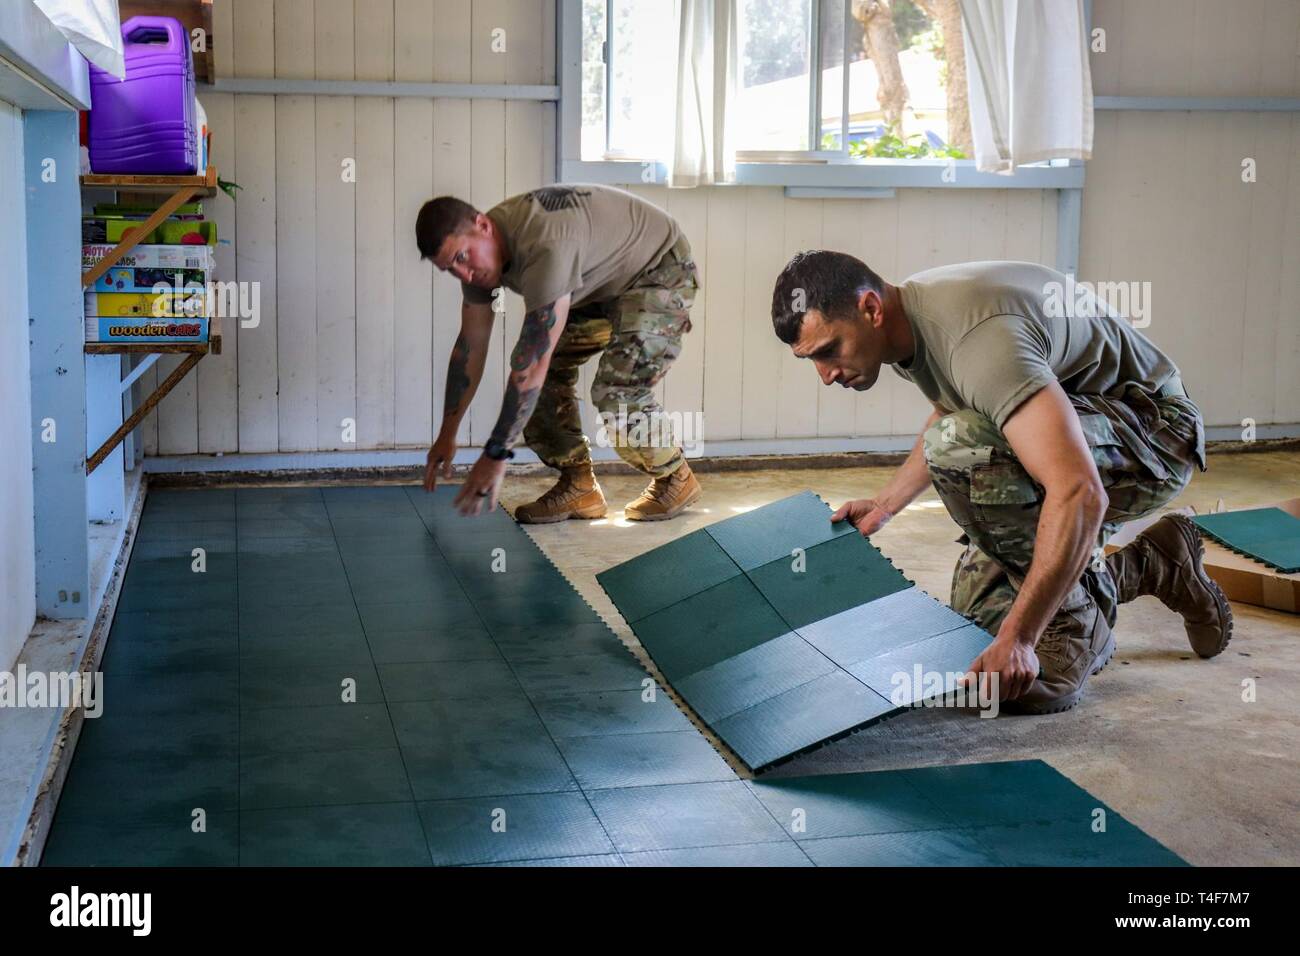 1st Sgt. Dennis Hudson (left) and Command Sgt. Major Nema Mobar (right), Soldiers assigned to 1-21 Infantry Battalion, 2nd Infantry Brigade Combat Team, 25th Infantry Division, place down plastic tiles in a building at St. James Episcopal Church, Waimea, Hawaii, April 10th, 2019. 25th ID Soldiers are conducting Exercise Lightning Strike at Pohakuloa Training Area. Soldiers come to PTA to hone their skills and improve their readiness and lethality at the premier training center of the Pacific region. Stock Photo